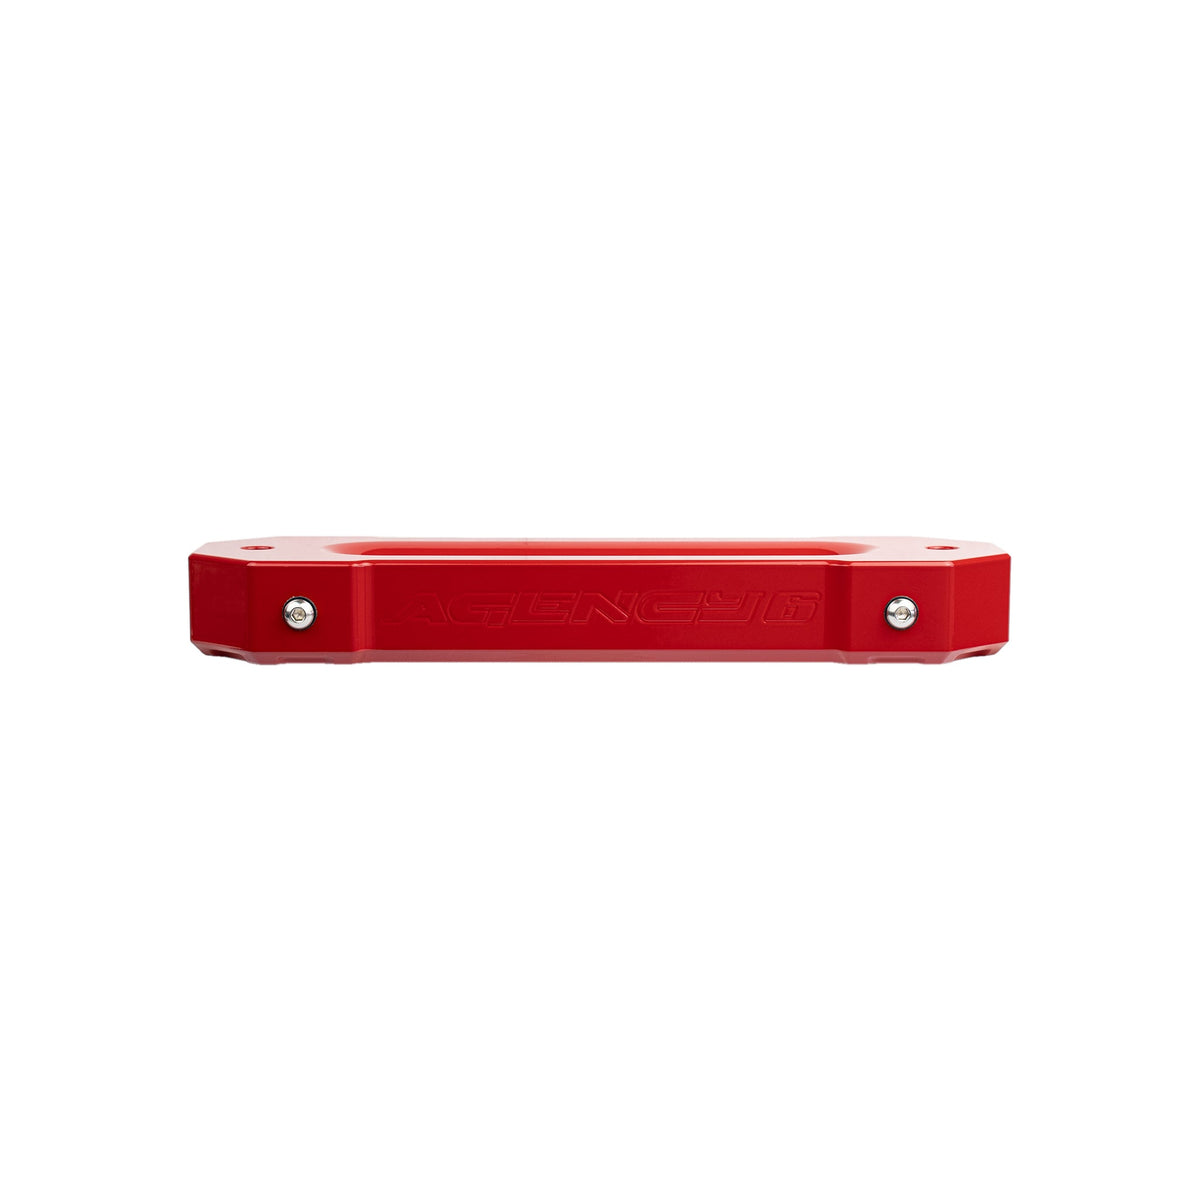 Fairlead (1.5" Thick) - Red